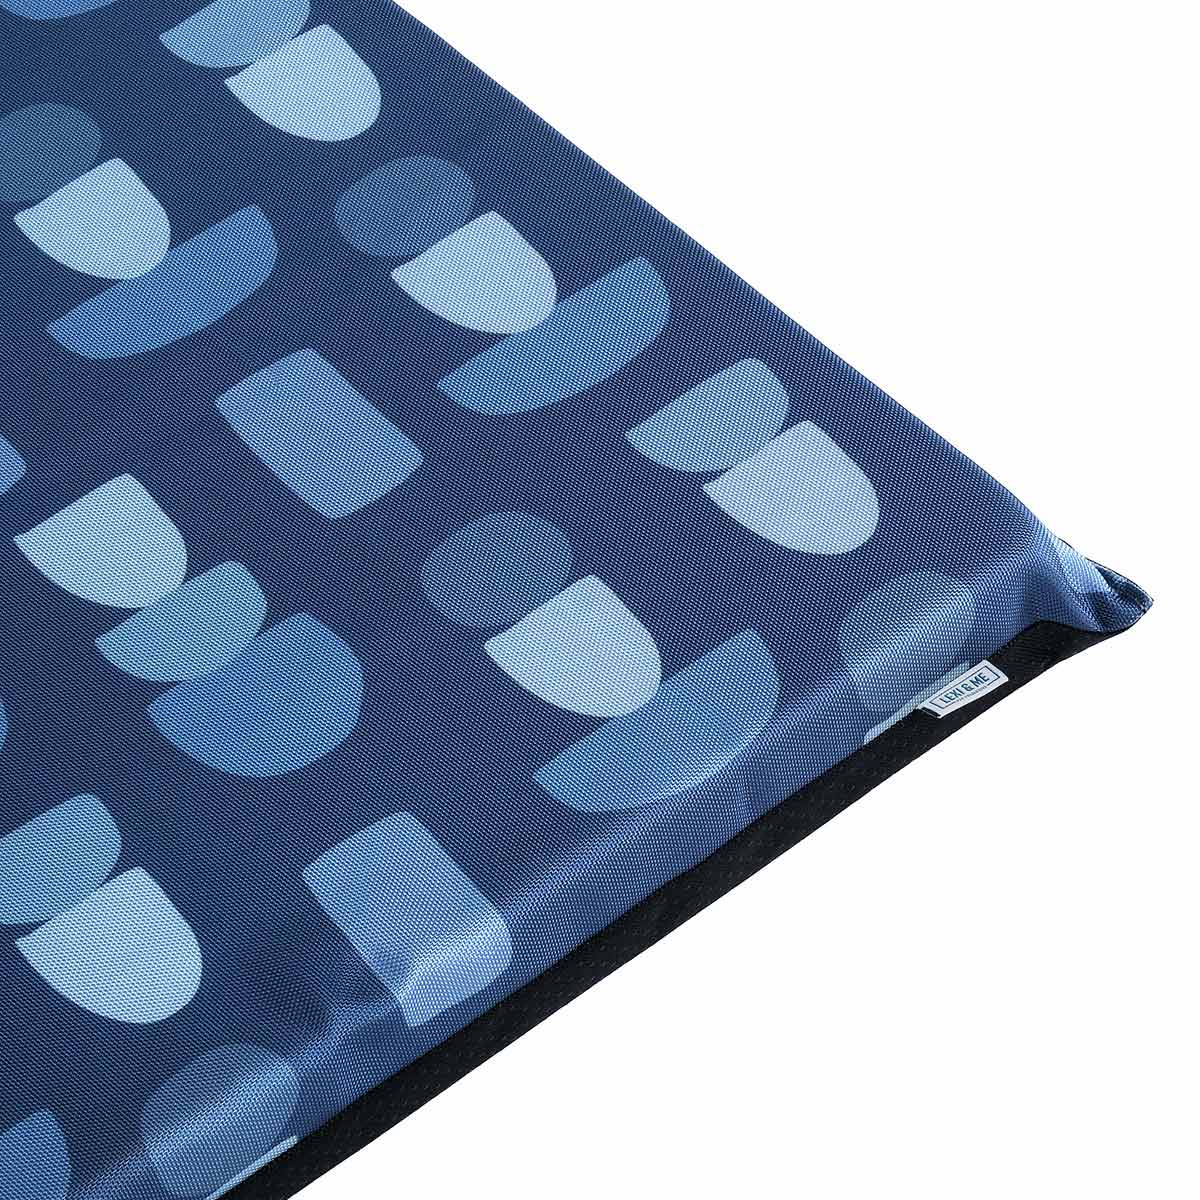 Lexi & Me Kennel/Crate Mat Steel Blue Geo Large/X-Large